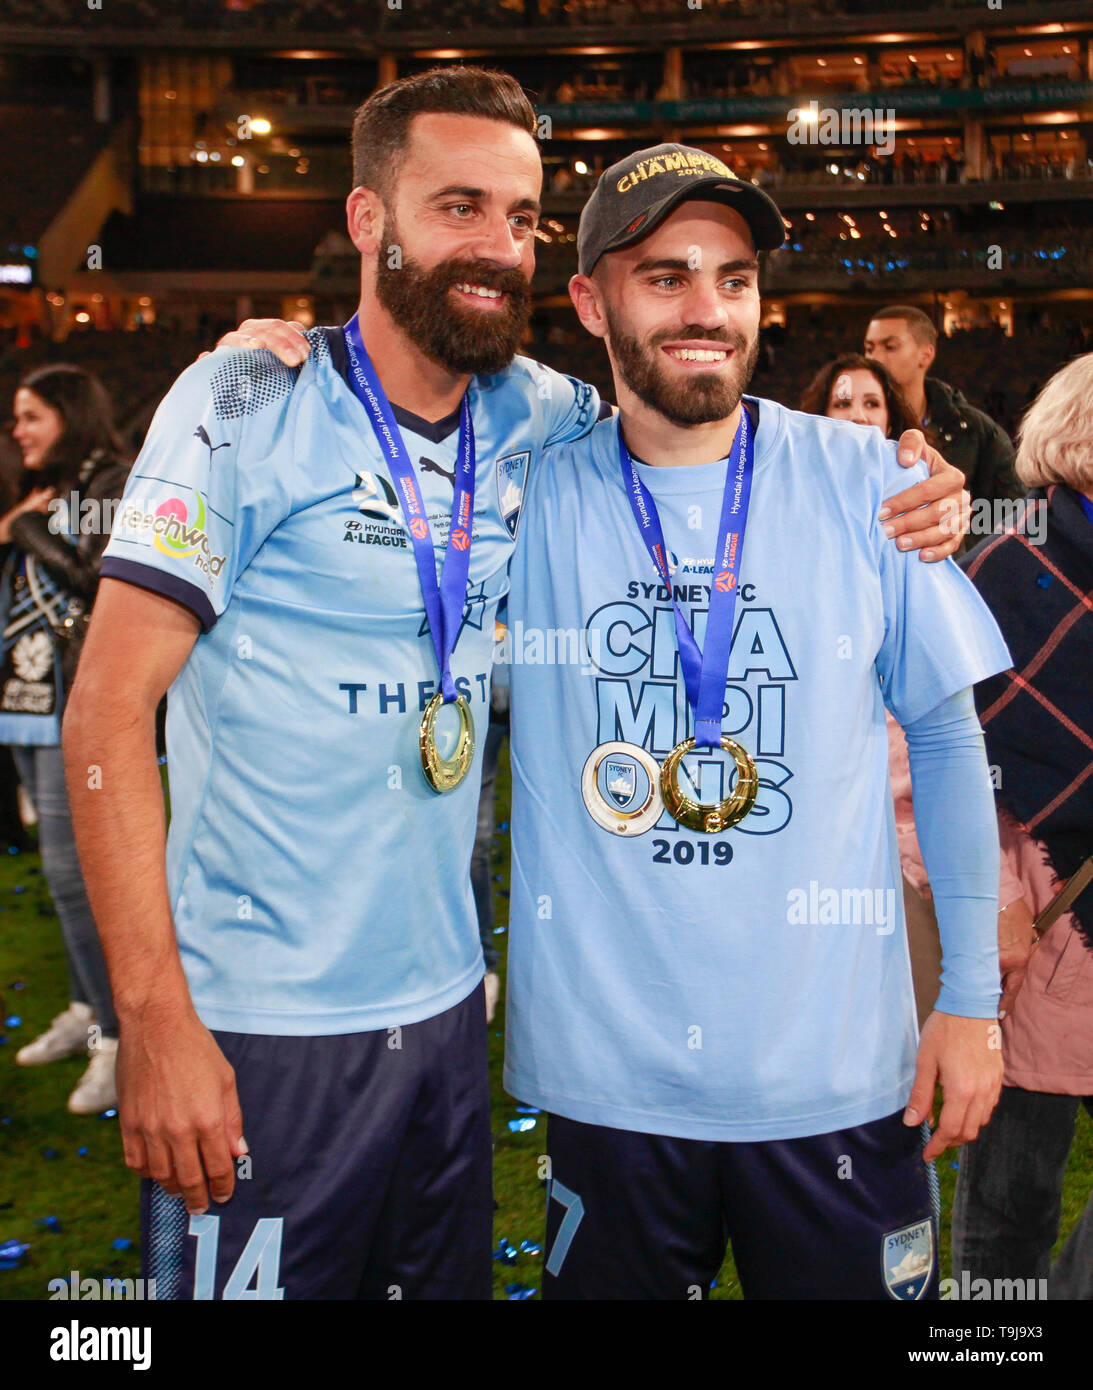 Perth Stadium, Perth, Australia. 19th May, 2019. A-League grand final, Perth Glory versus Sydney FC; Alex Brusque and Anthony Careers of Sydney FC pose with their winners medallions after winning the match against Perth Glory 4-1 in penalties Credit: Action Plus Sports/Alamy Live News Stock Photo